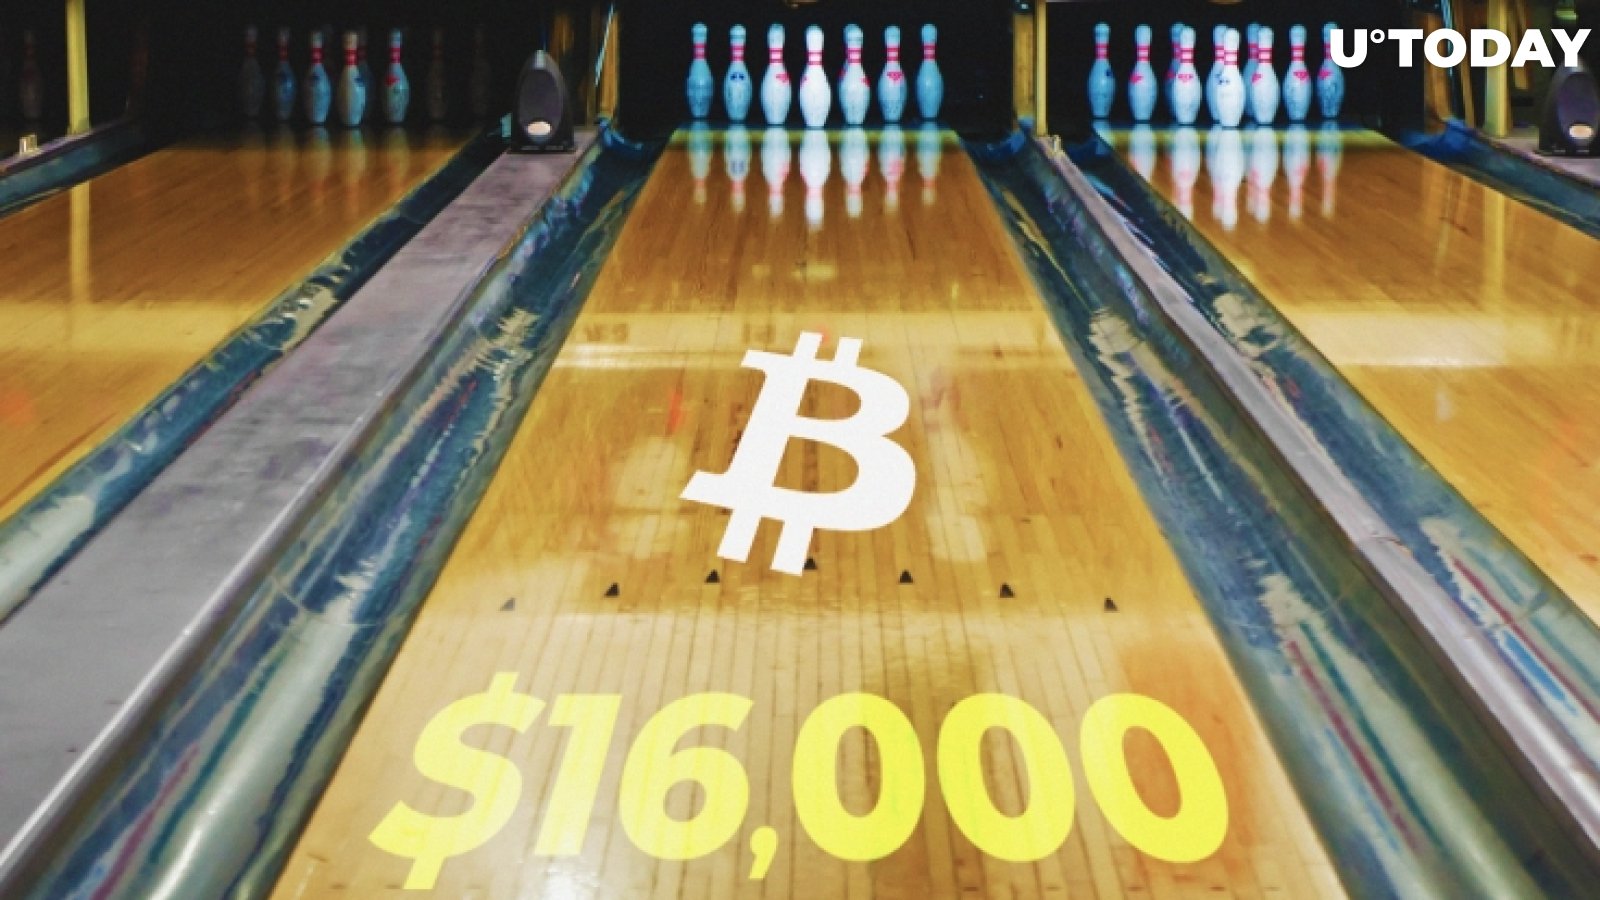 Top BitMEX Trader Says Bitcoin (BTC) Price Is Going to Reach $16,000 by October 